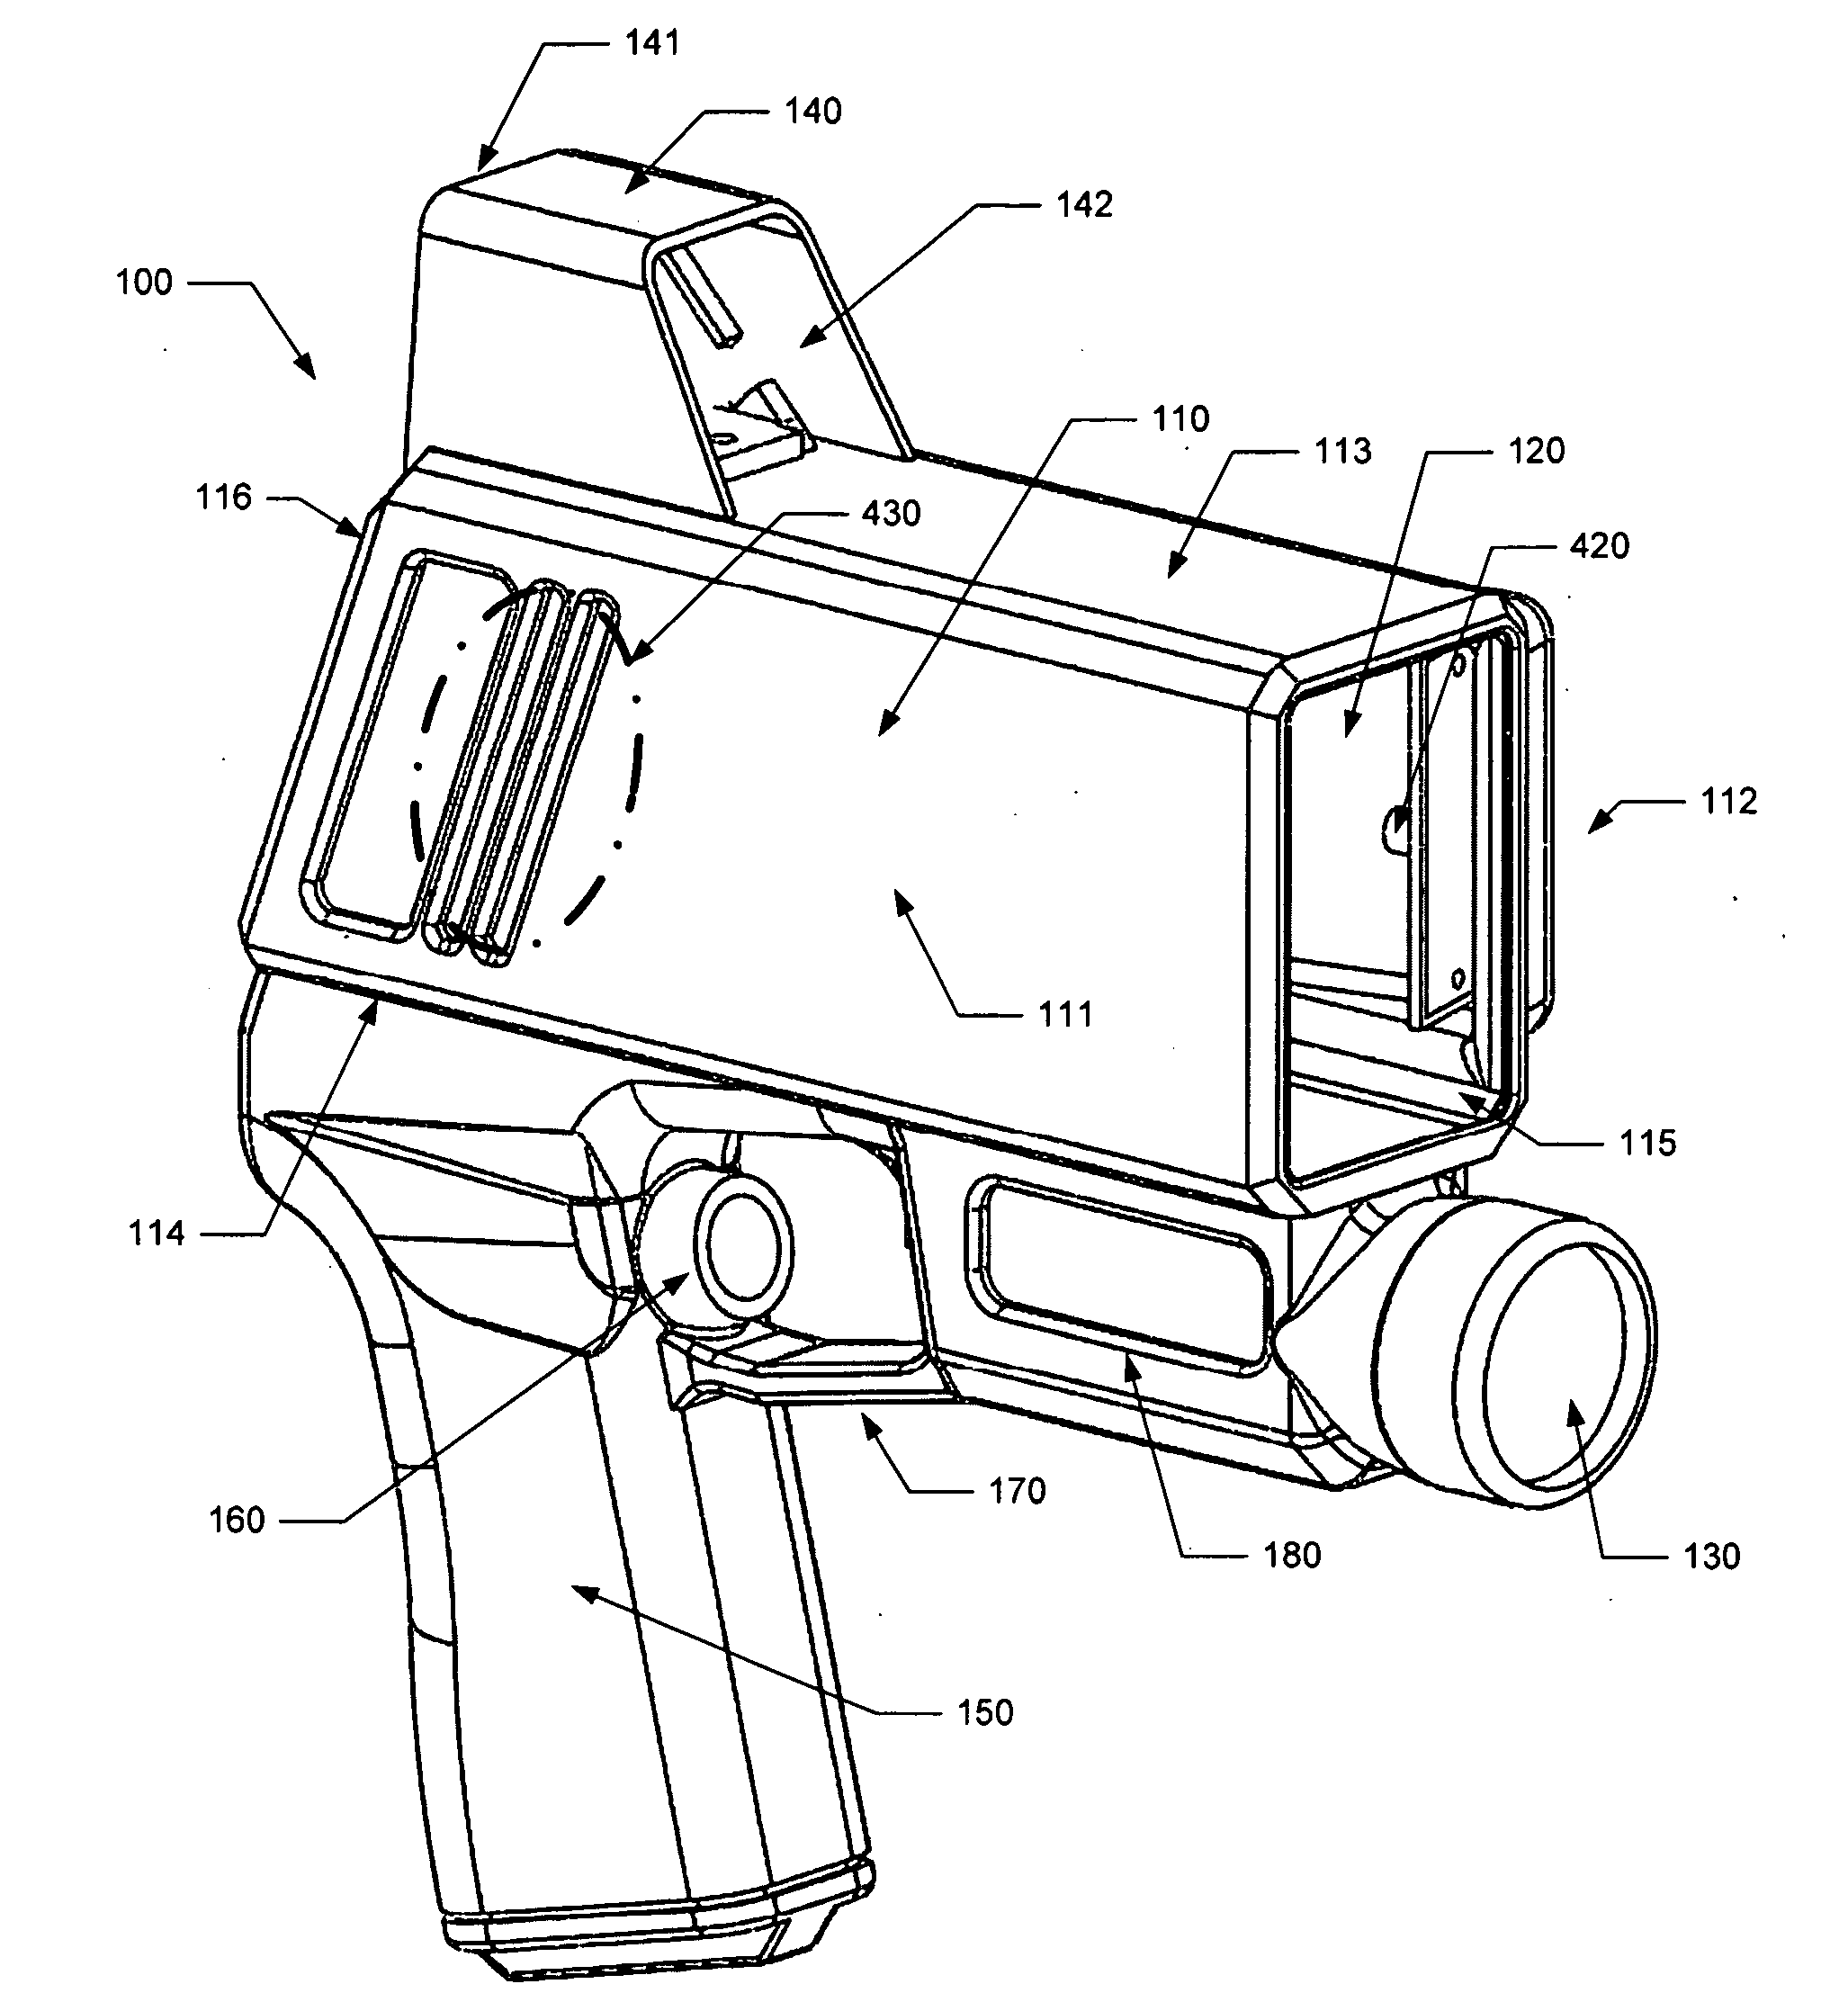 Lidar devices with reflective optics